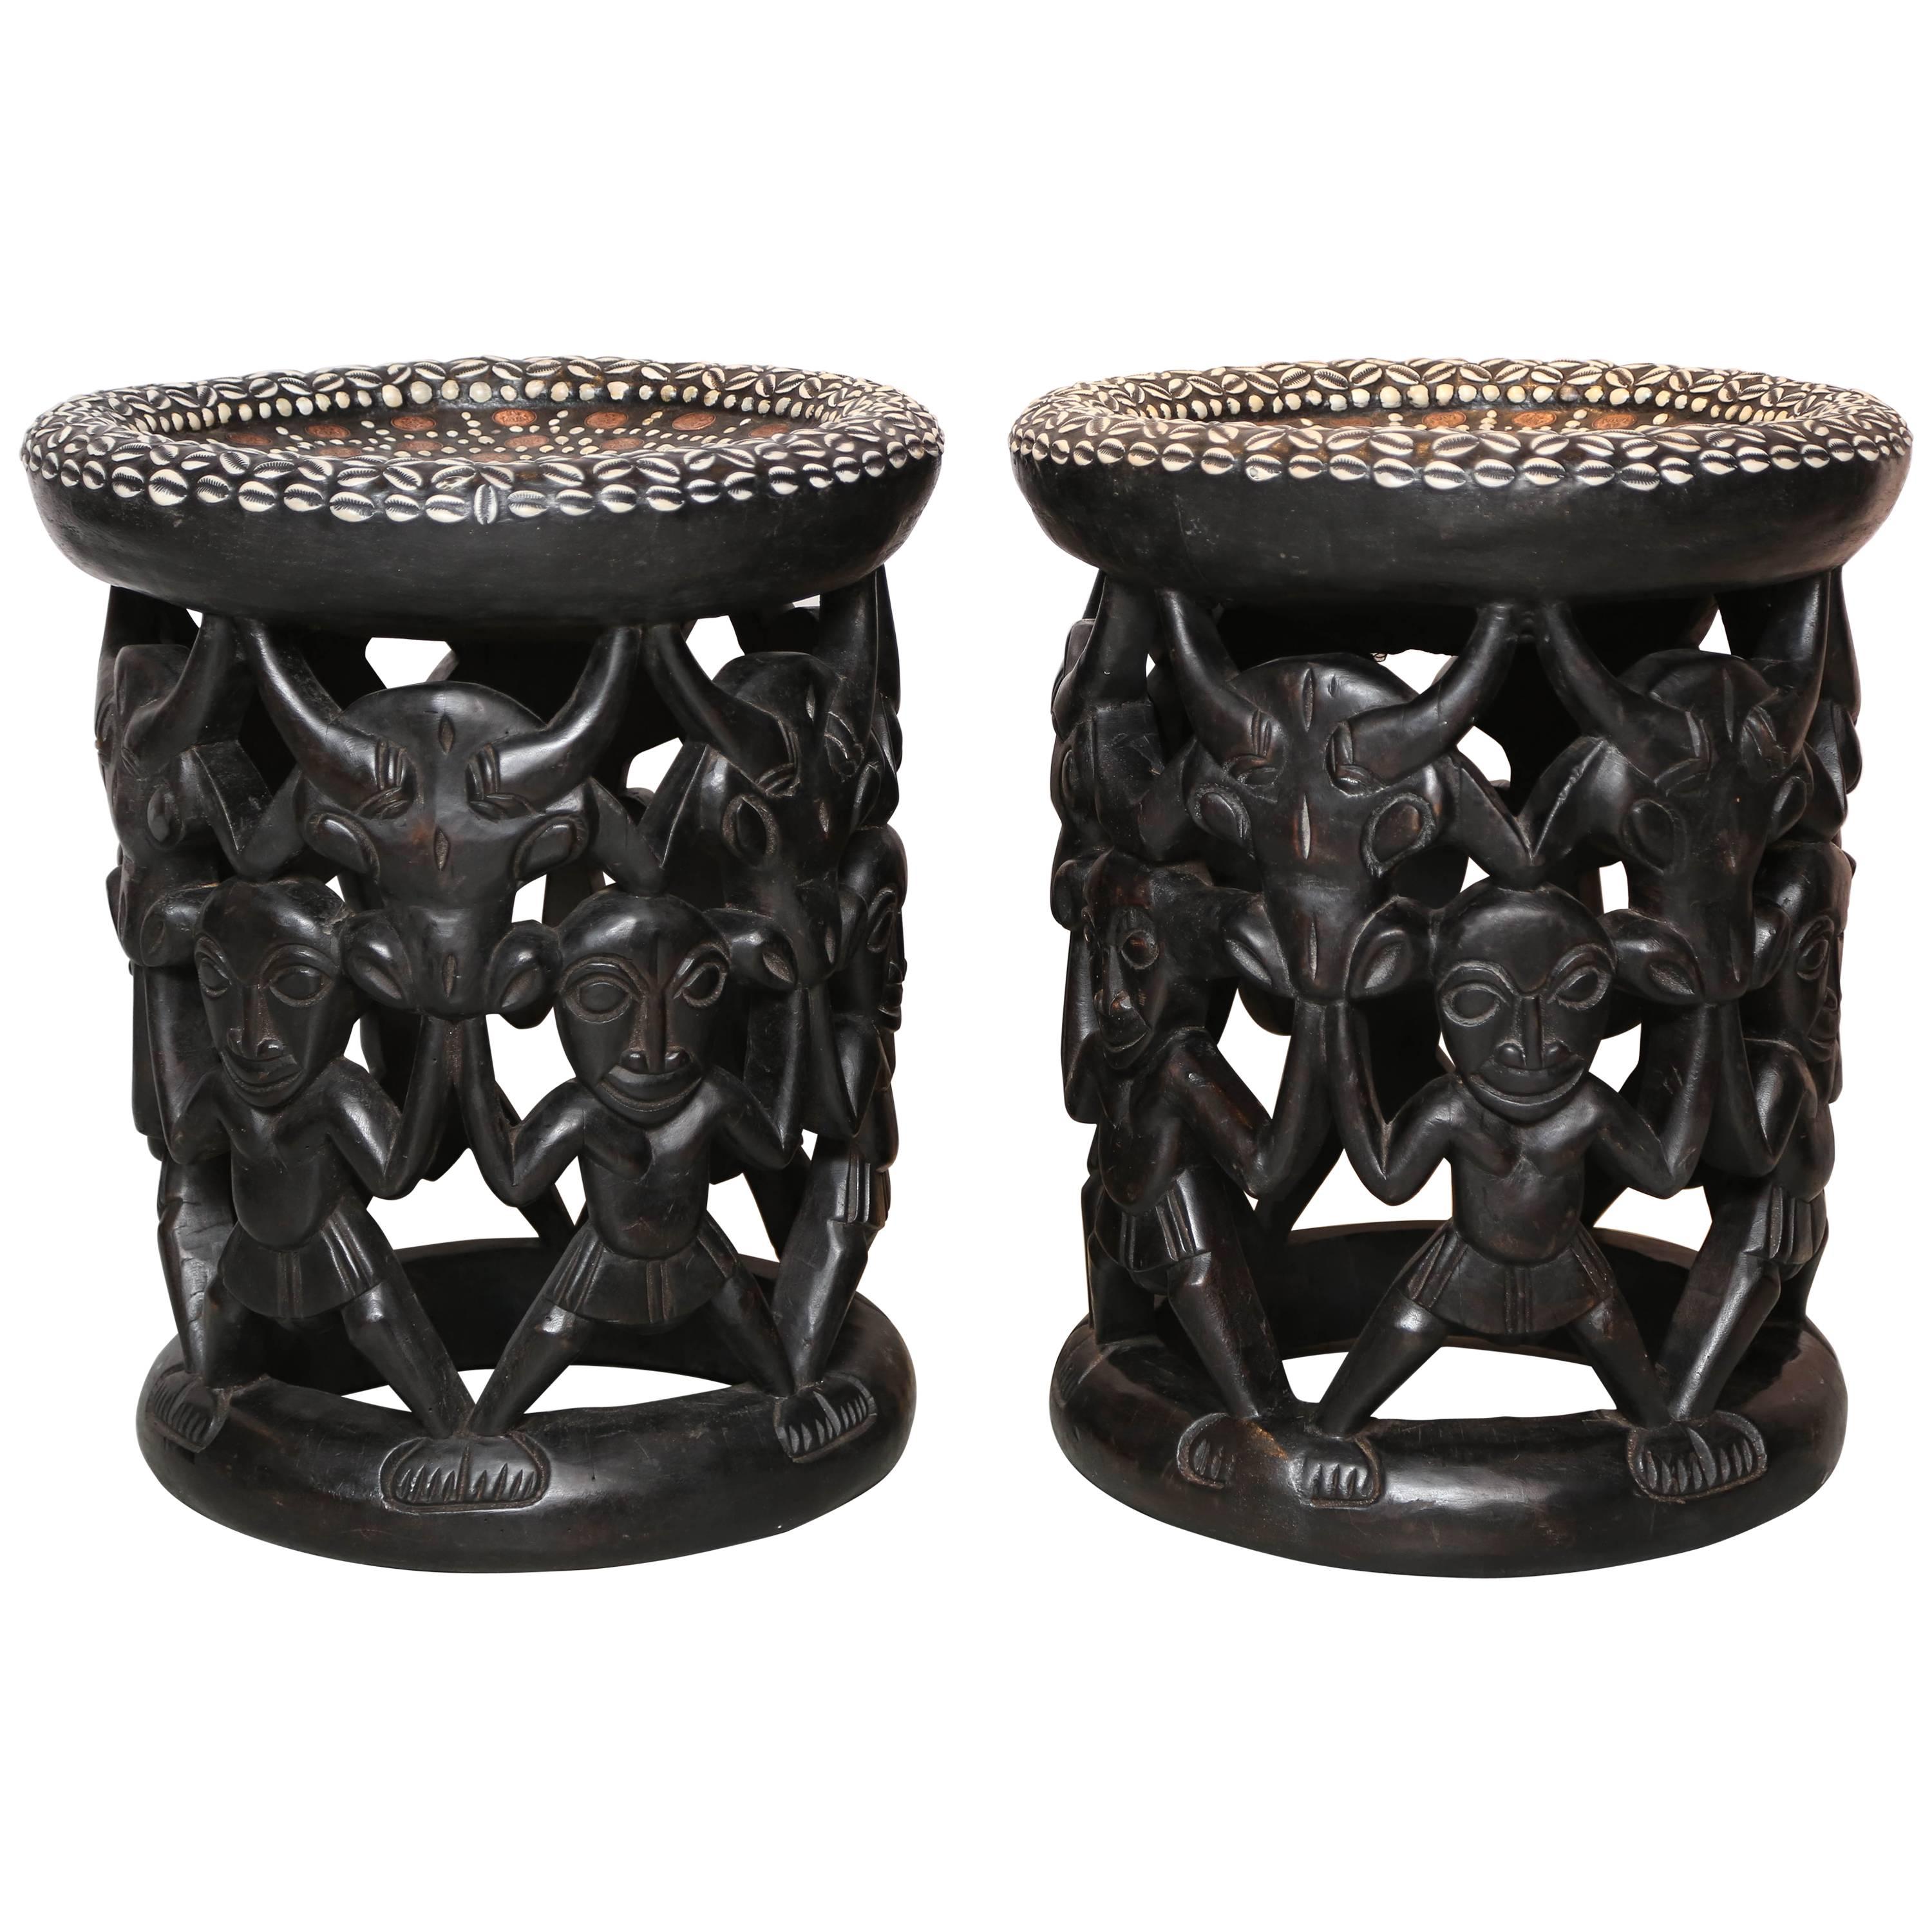 Pair of African Side Tables Extensive Woodcarving Top Inlaid Coins, Cowry Shells For Sale